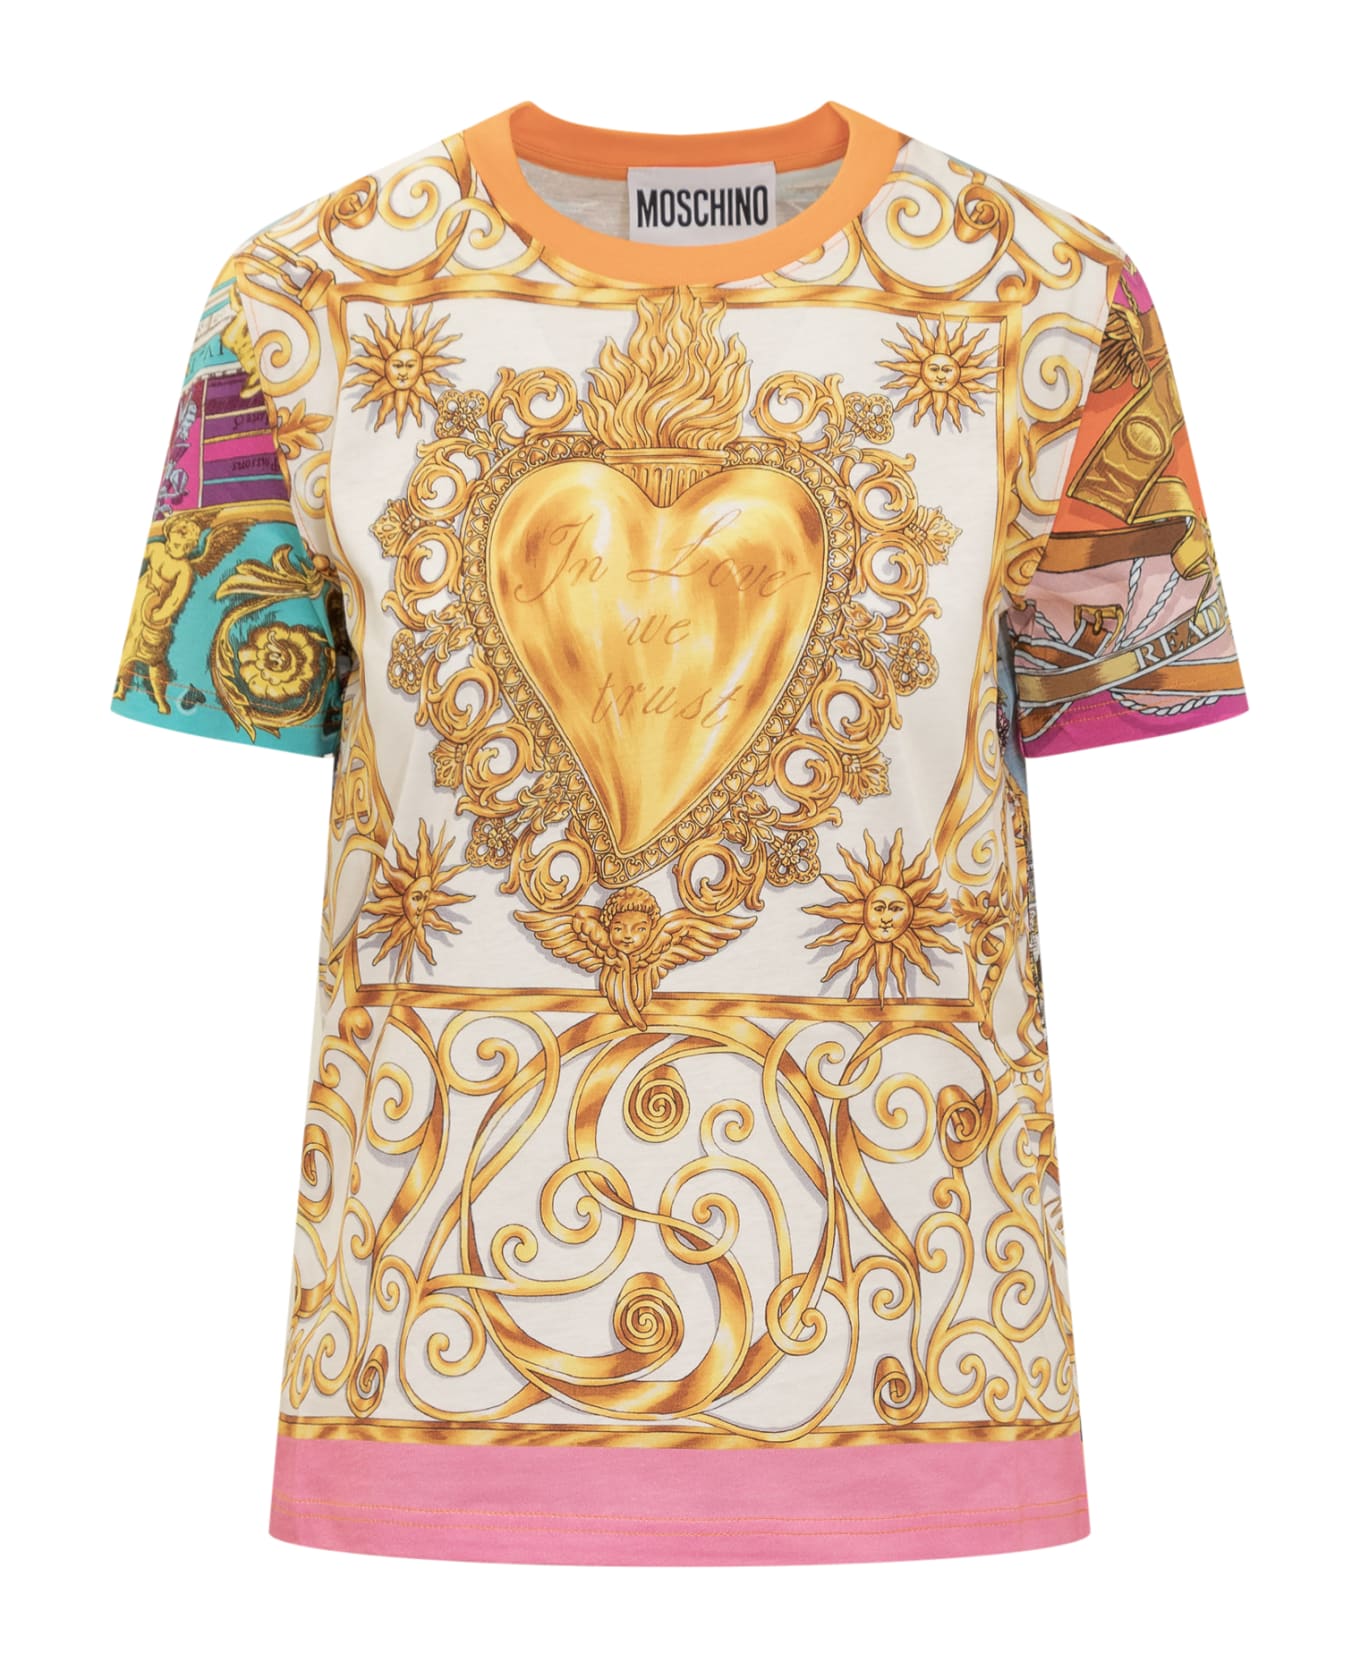 Moschino Archive Scarves Print T-shirt - MultiColour